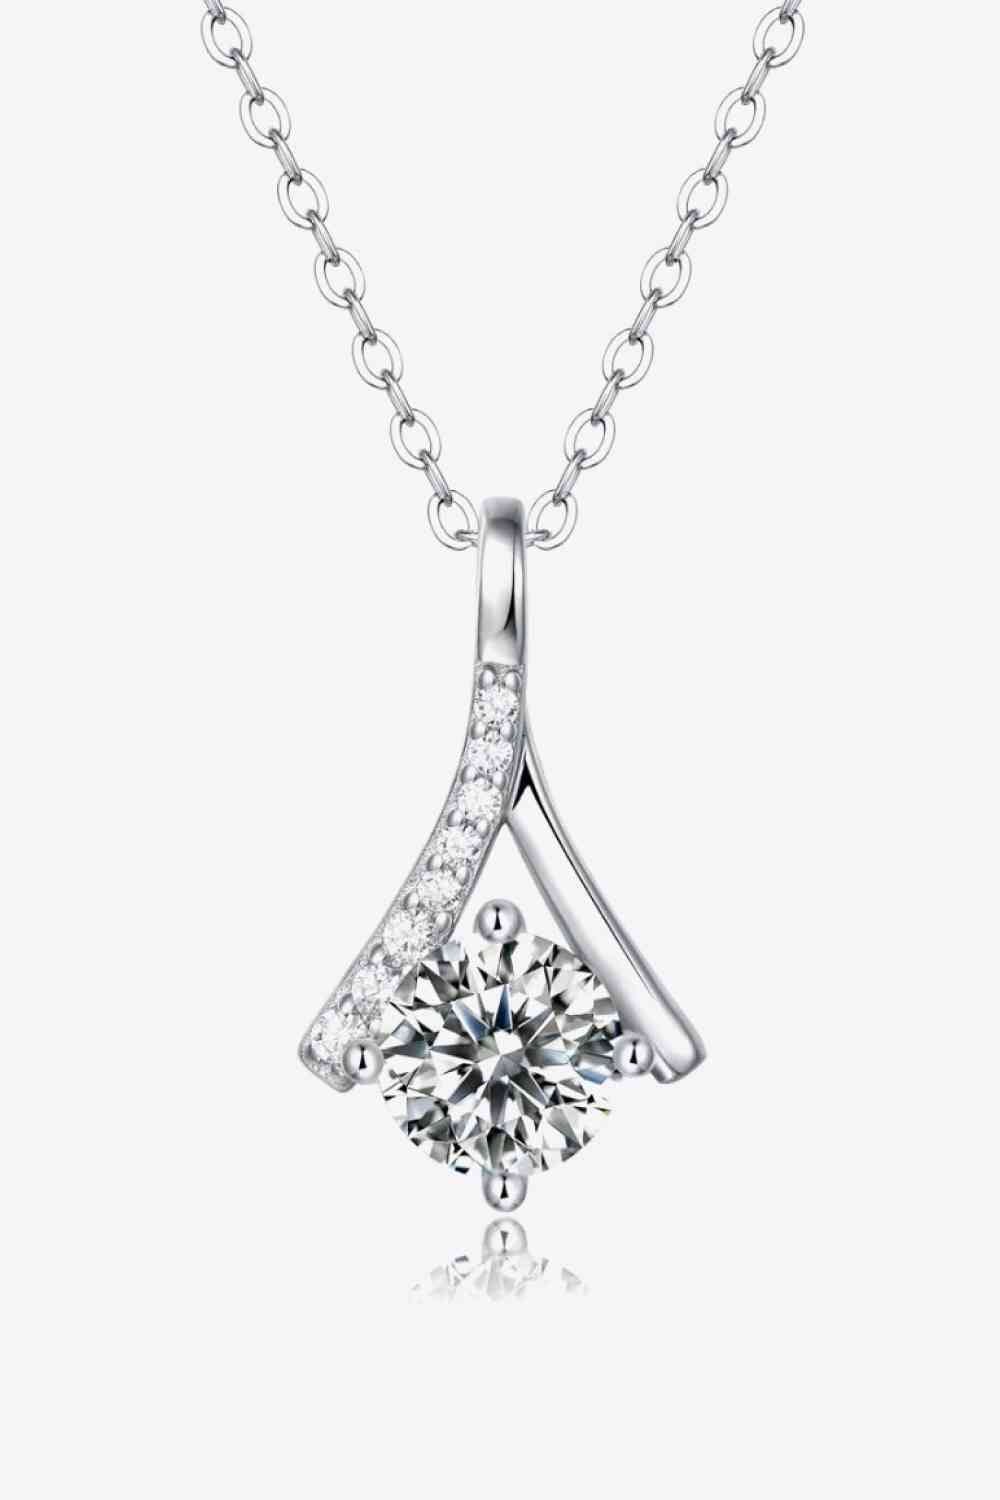 Special Occasion 1 Carat Moissanite Pendant Necklace - Tophatter Shopping Deals